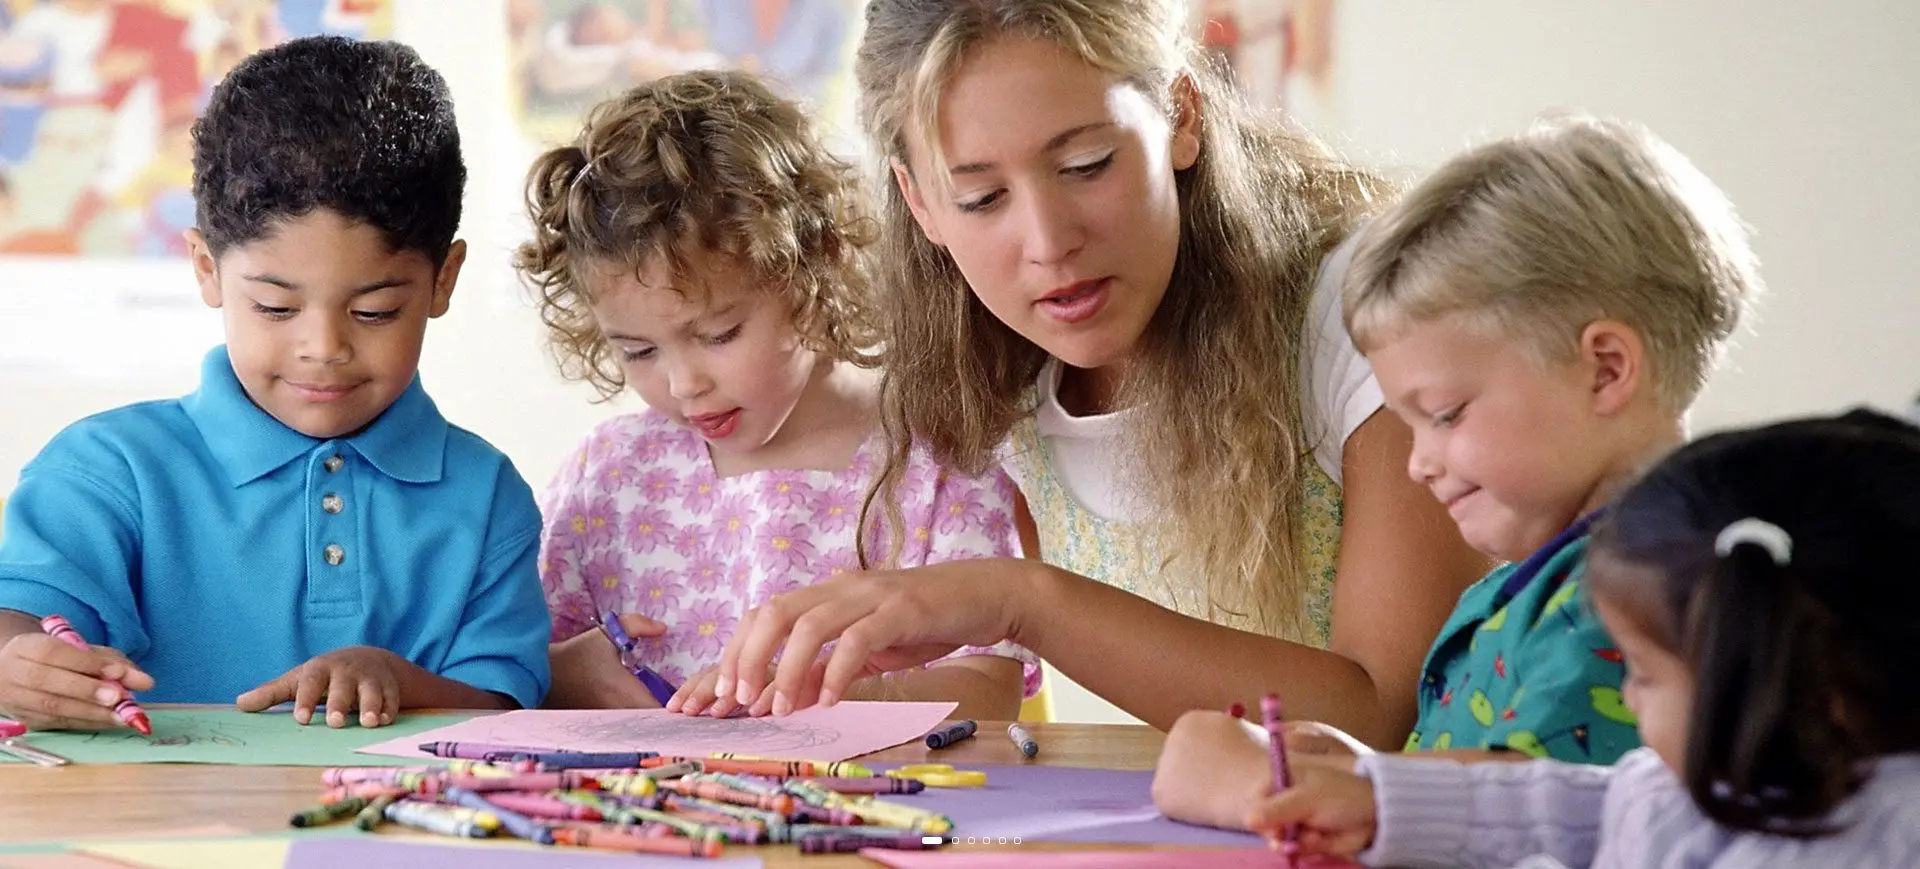 A woman and two children are working on crafts.